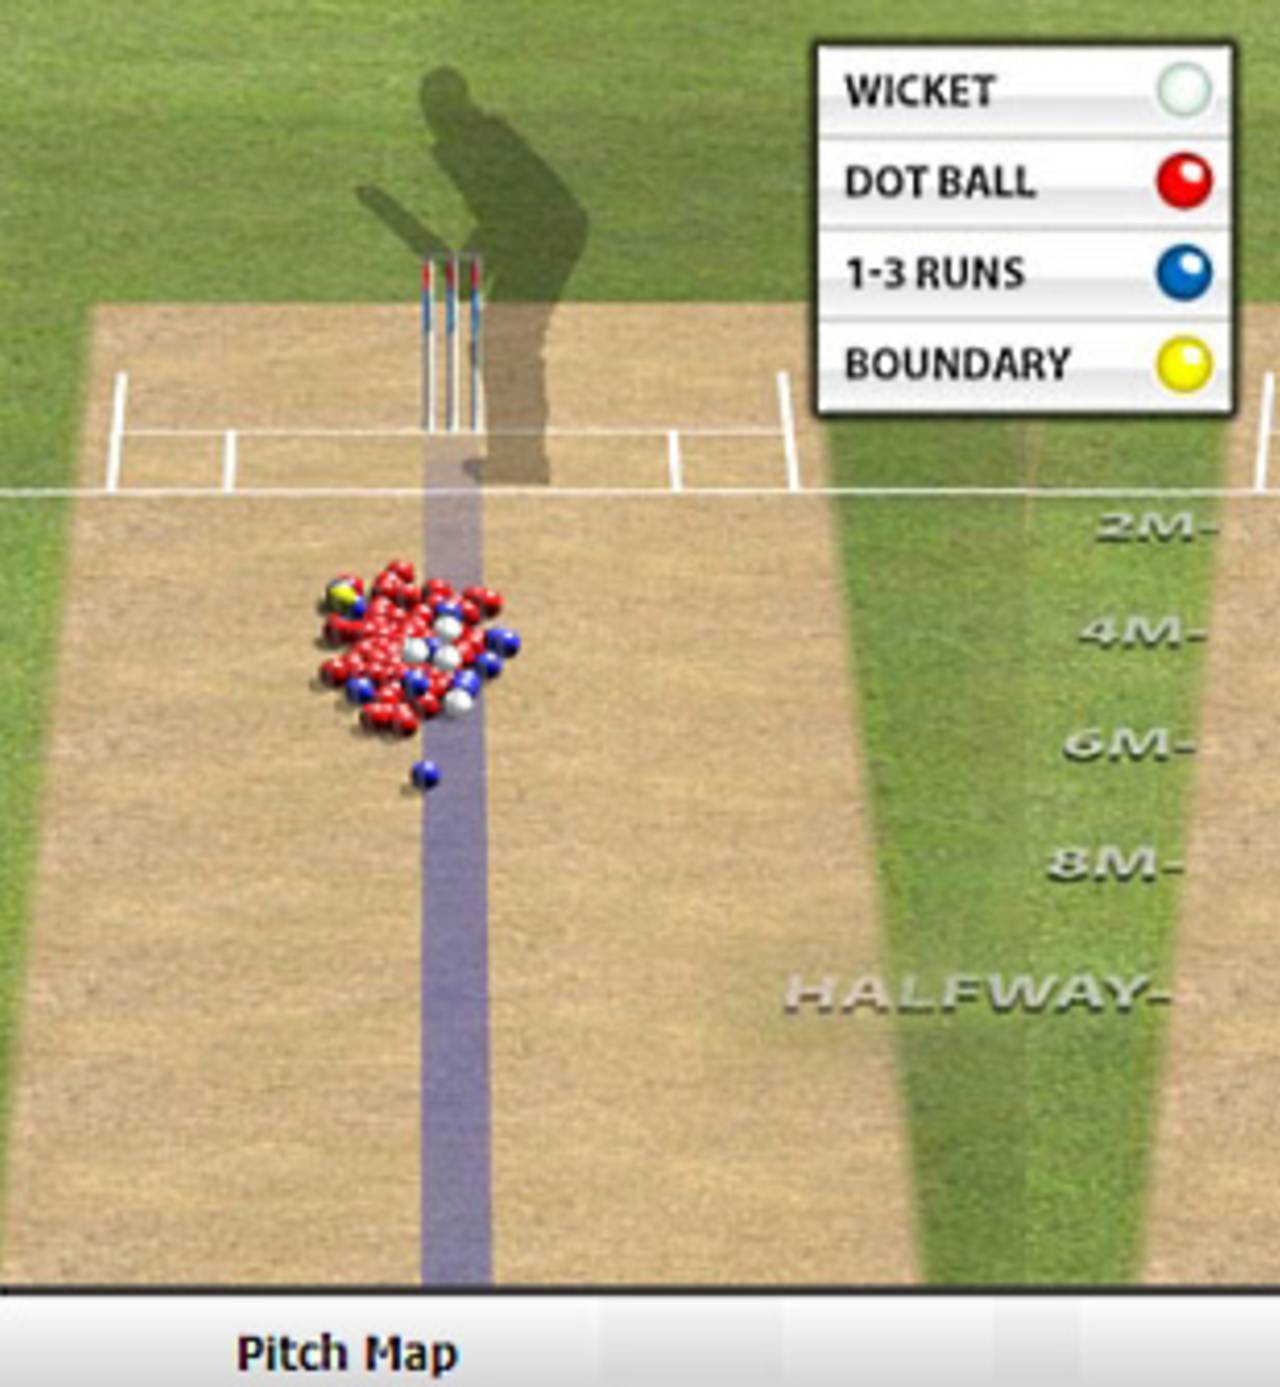 A pitch map of Pragyan Ojha's first-innings bowling performance - click to enlarge (ESPNcricinfo is not carrying live pictures due to curbs on media)&nbsp;&nbsp;&bull;&nbsp;&nbsp;Hawk-Eye